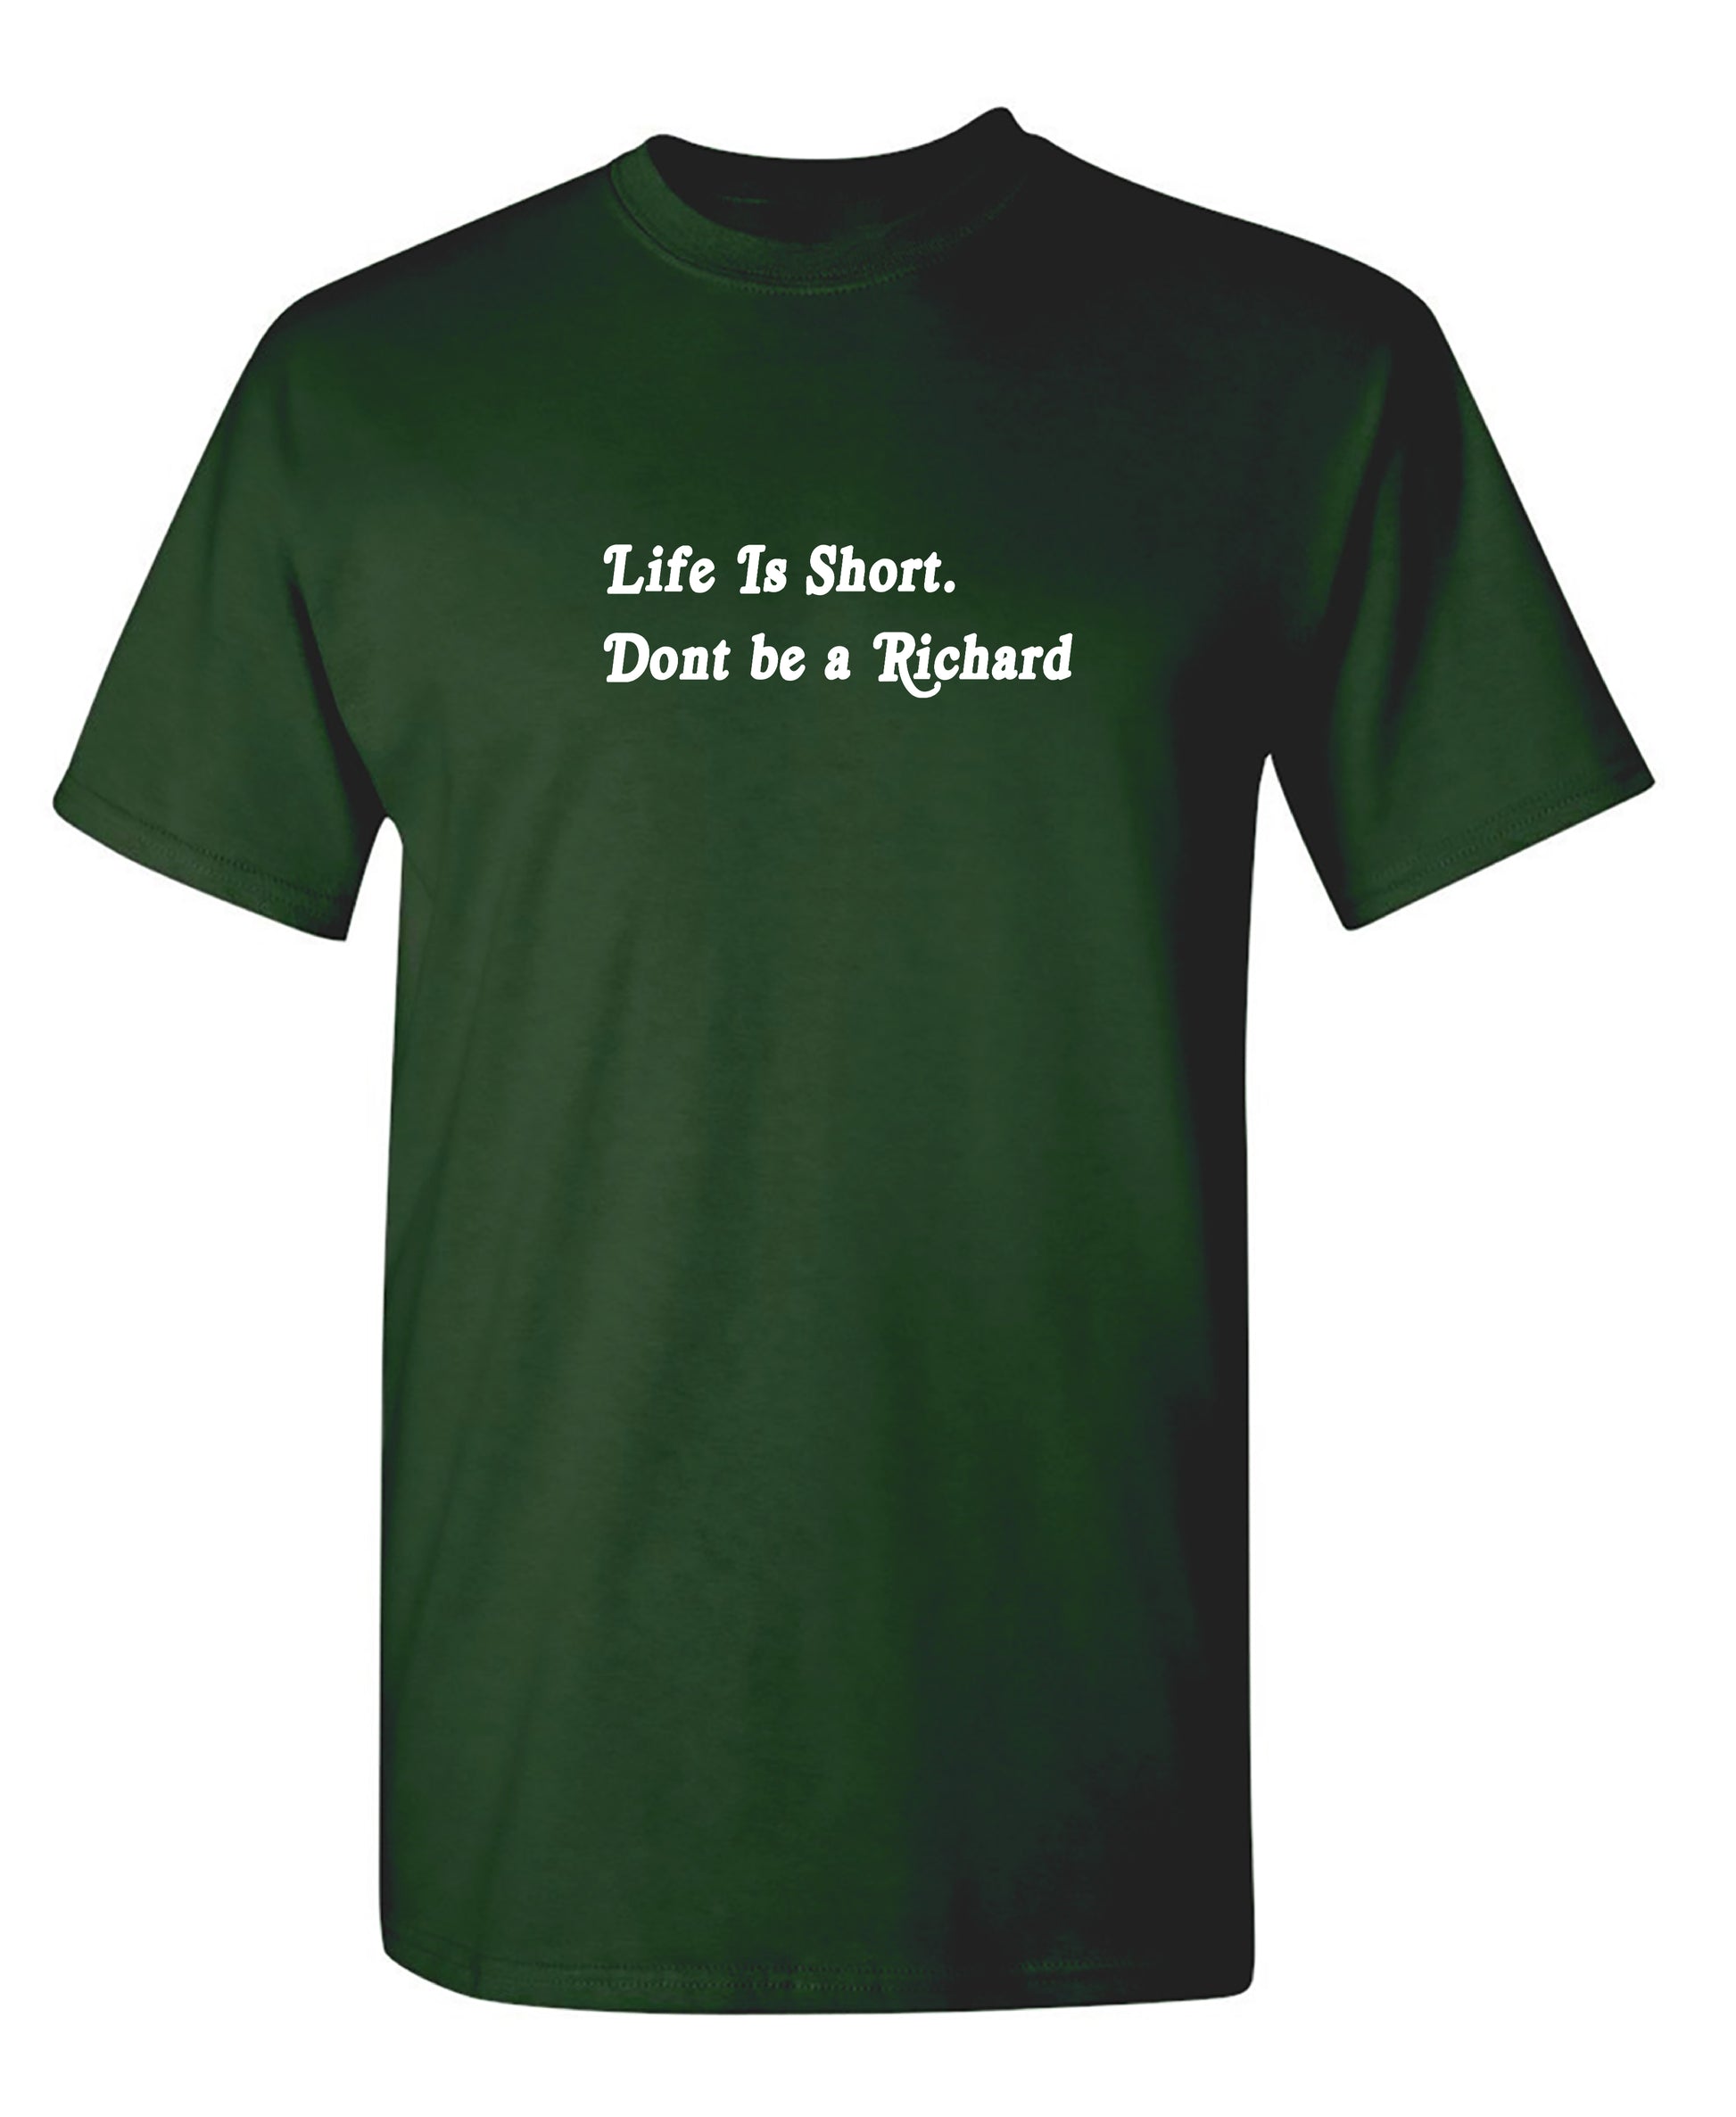 Life Is Short. Don't Be A Richard - Funny T Shirts & Graphic Tees